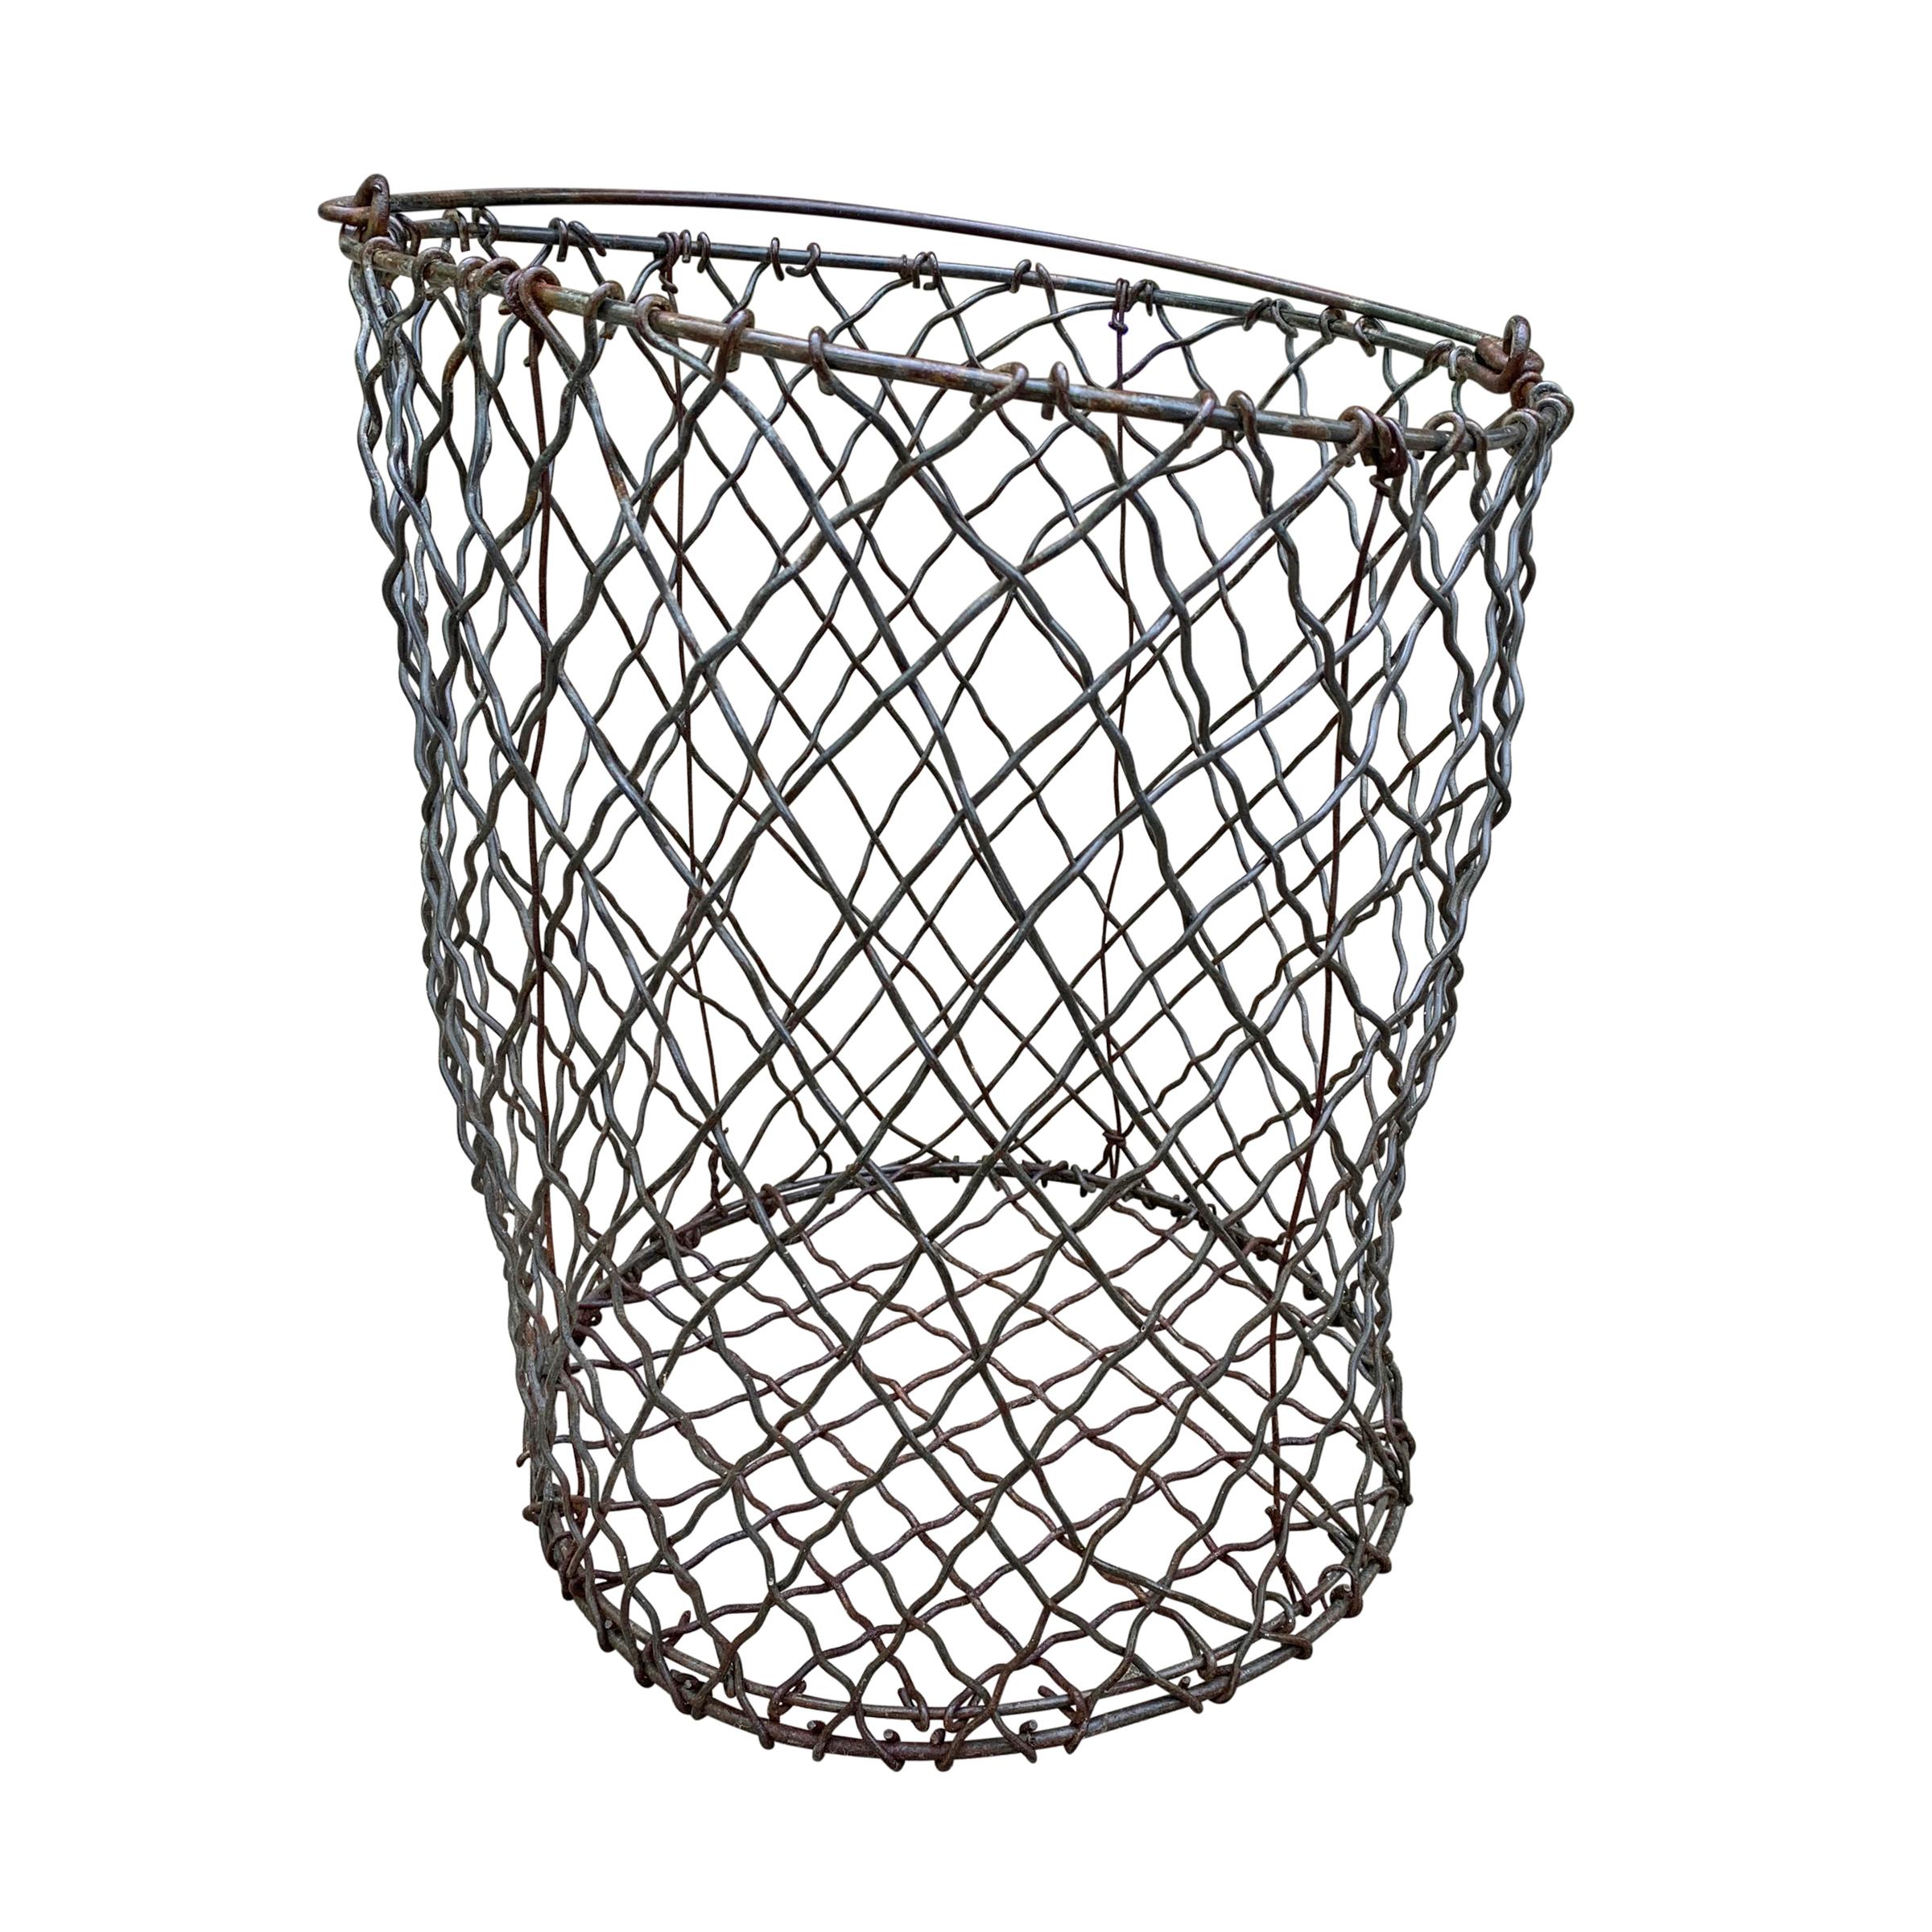 A wonderful vintage American industrial woven wire basket of round form with a handle, and groovy wonky form. Perfect for a waste paper basket in a powder room, or catchall for gloves and scarves by your front door.